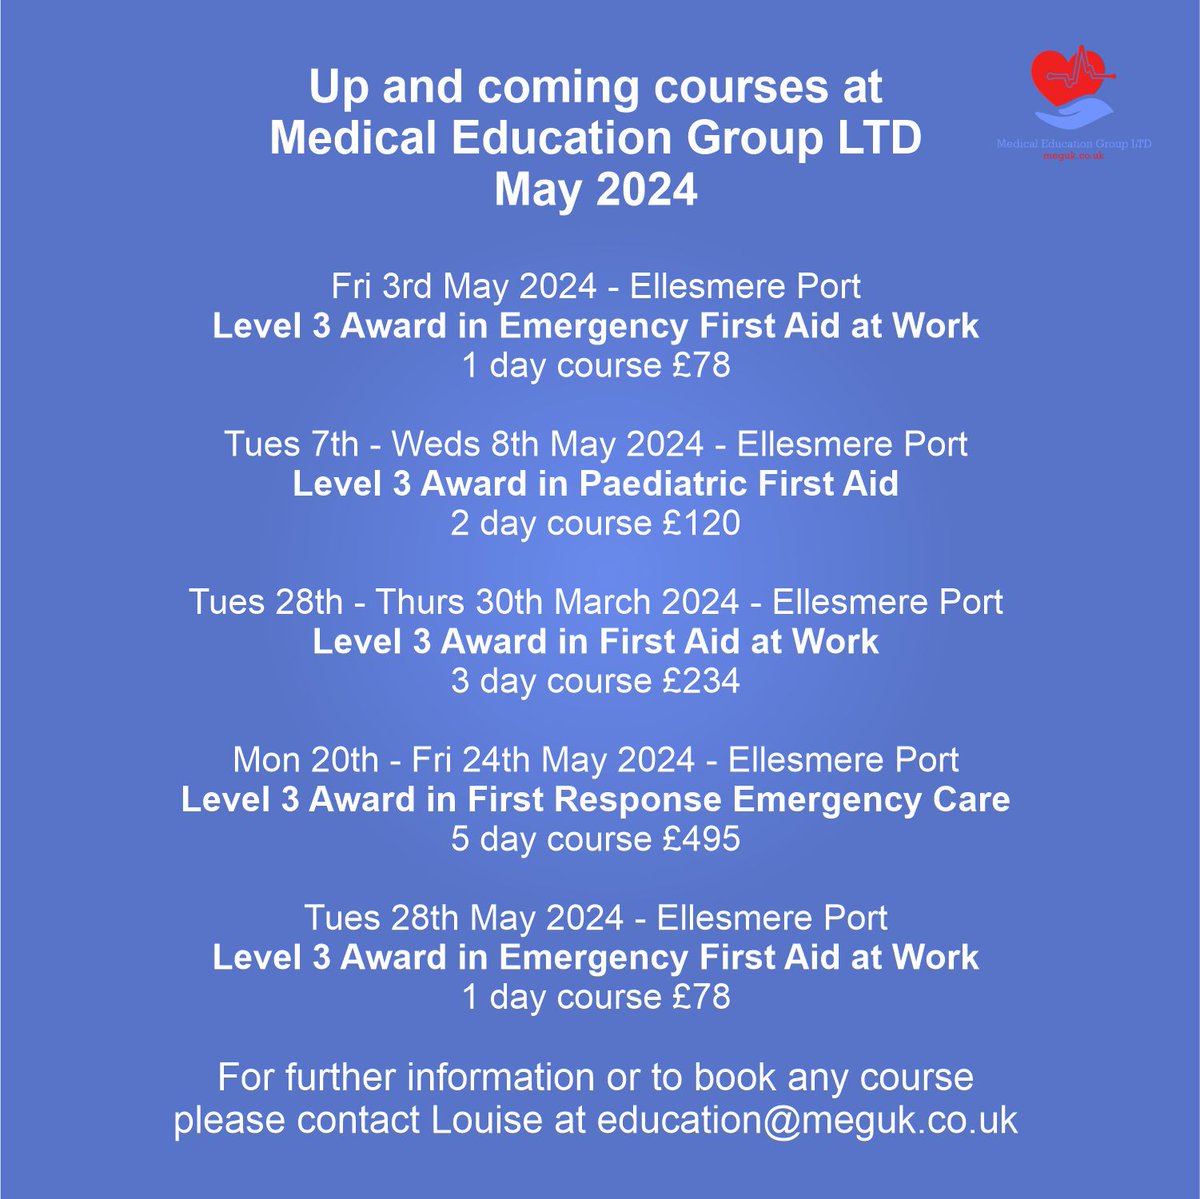 📆🚑 Exciting May 2024 courses at Medical Education Group LTD, Ellesmere Port!
Contact Louise at 0151 458 8768 or education@meguk.co.uk for booking! 📧
#FirstAid #EmergencyTraining #HealthAndSafety #EllesmerePort